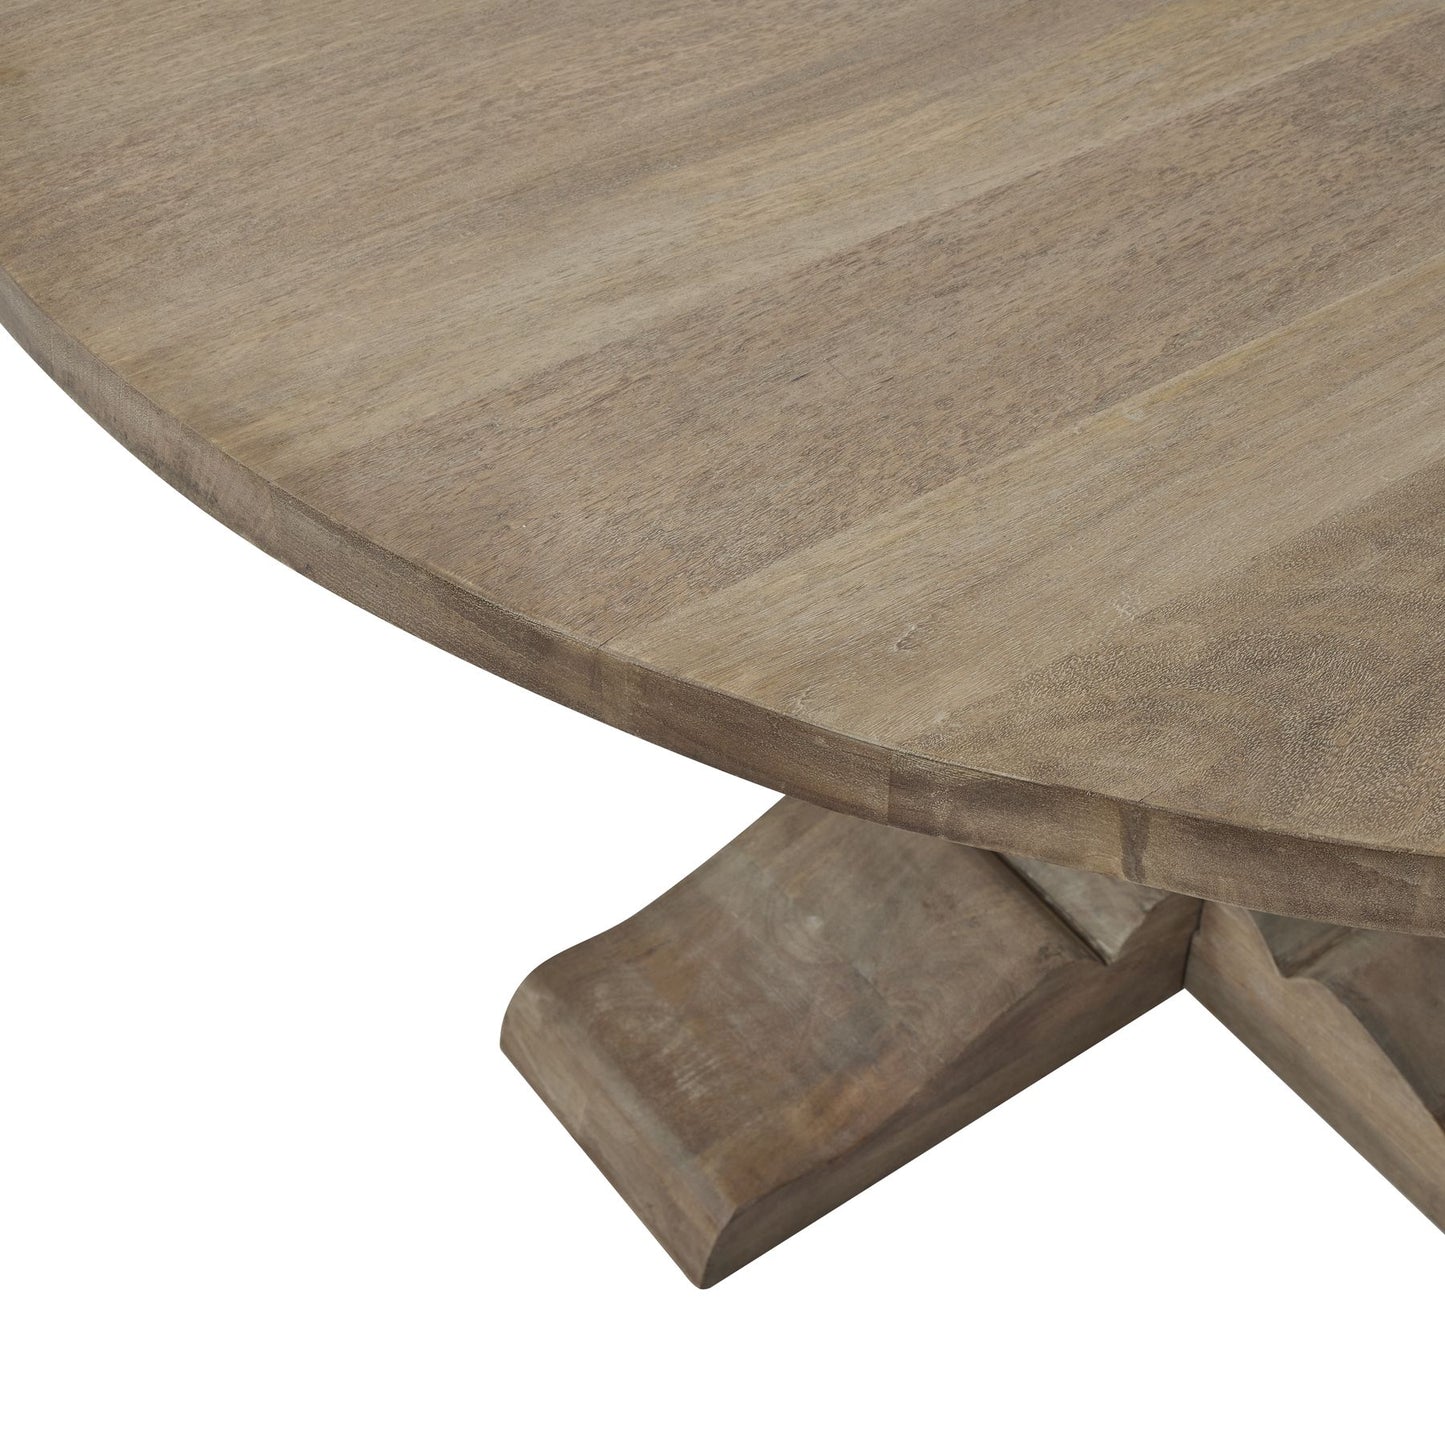 Portia Round Wood Pedestal Dining Table